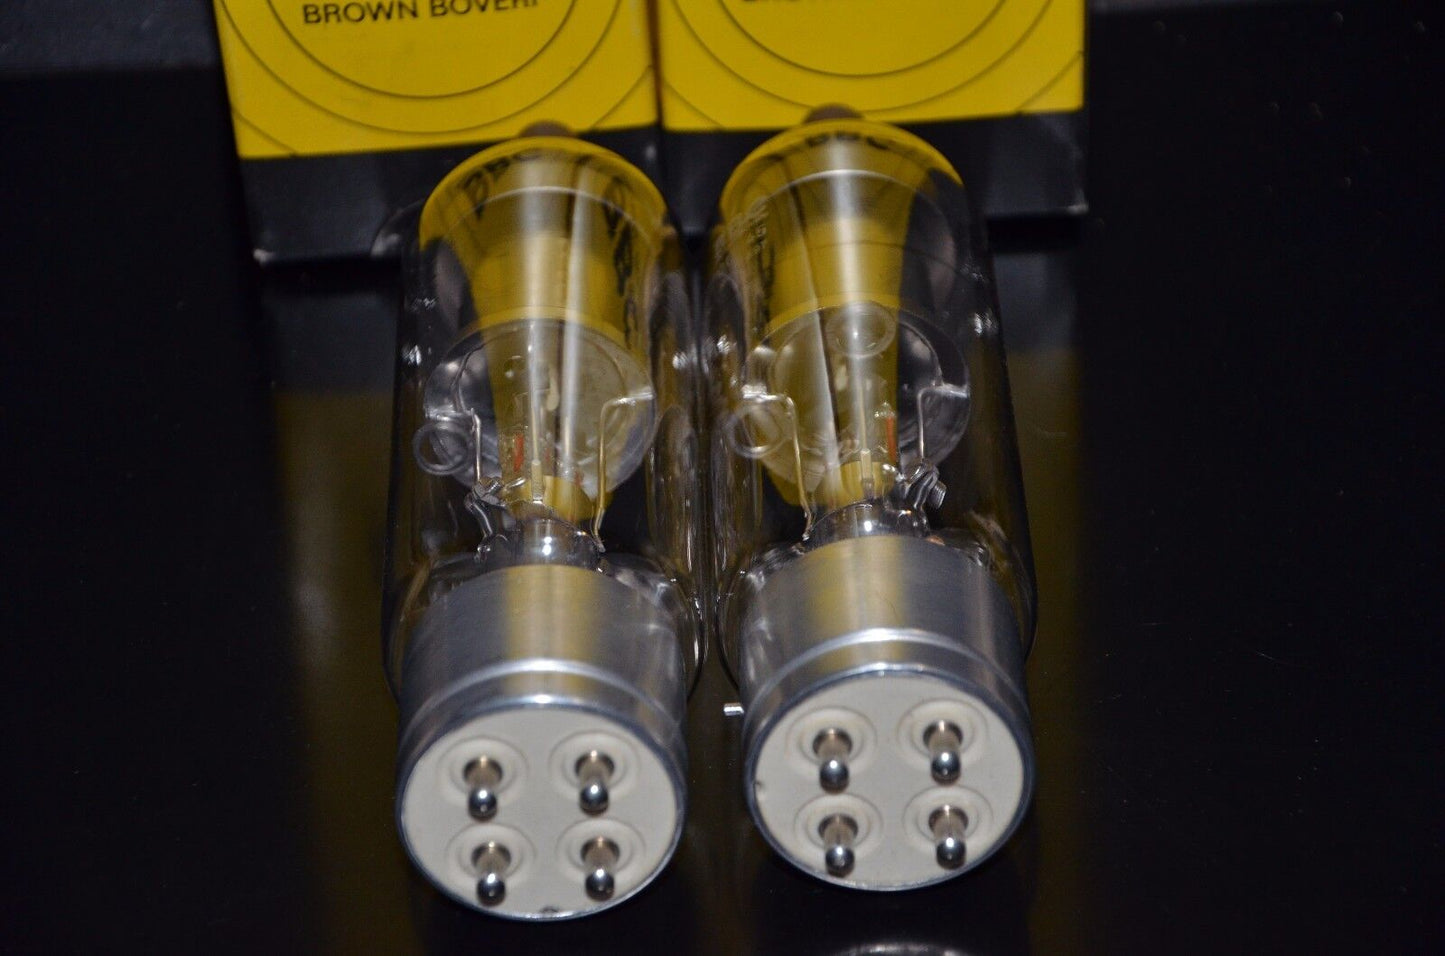 DQ45 Brown Boweri Half Wave Rectifiers - Matched Pair NOS Made in Swiss